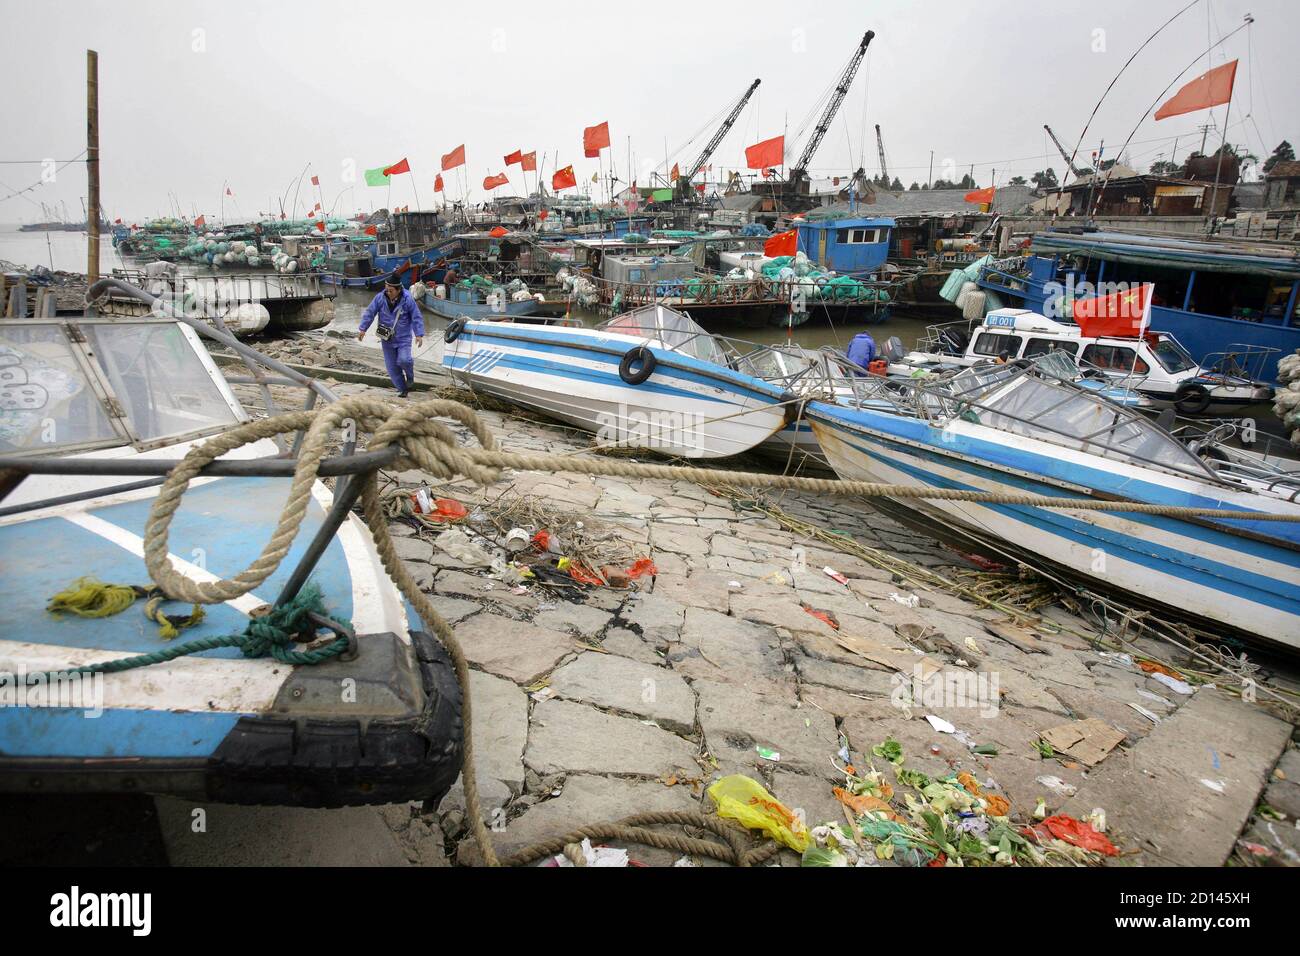 A fisherman steps off his boat at the harbour in Dongtan, where Dongtan Eco City is planned to be built, on Chong Ming Island southeast to Shanghai January 21, 2008. British Prime Minister Gordon Brown hailed a new era of environmental cooperation between Britain and China on January 19, 2008 and called for a renewed drive for a world trade deal. Brown visited a highly efficient gas-fired power station in Beijing and studied the plans for the environmentally friendly Dongtan Eco City to be built near Shanghai, in efforts to underline his keenness to cooperate with China on fighting global warm Stock Photo